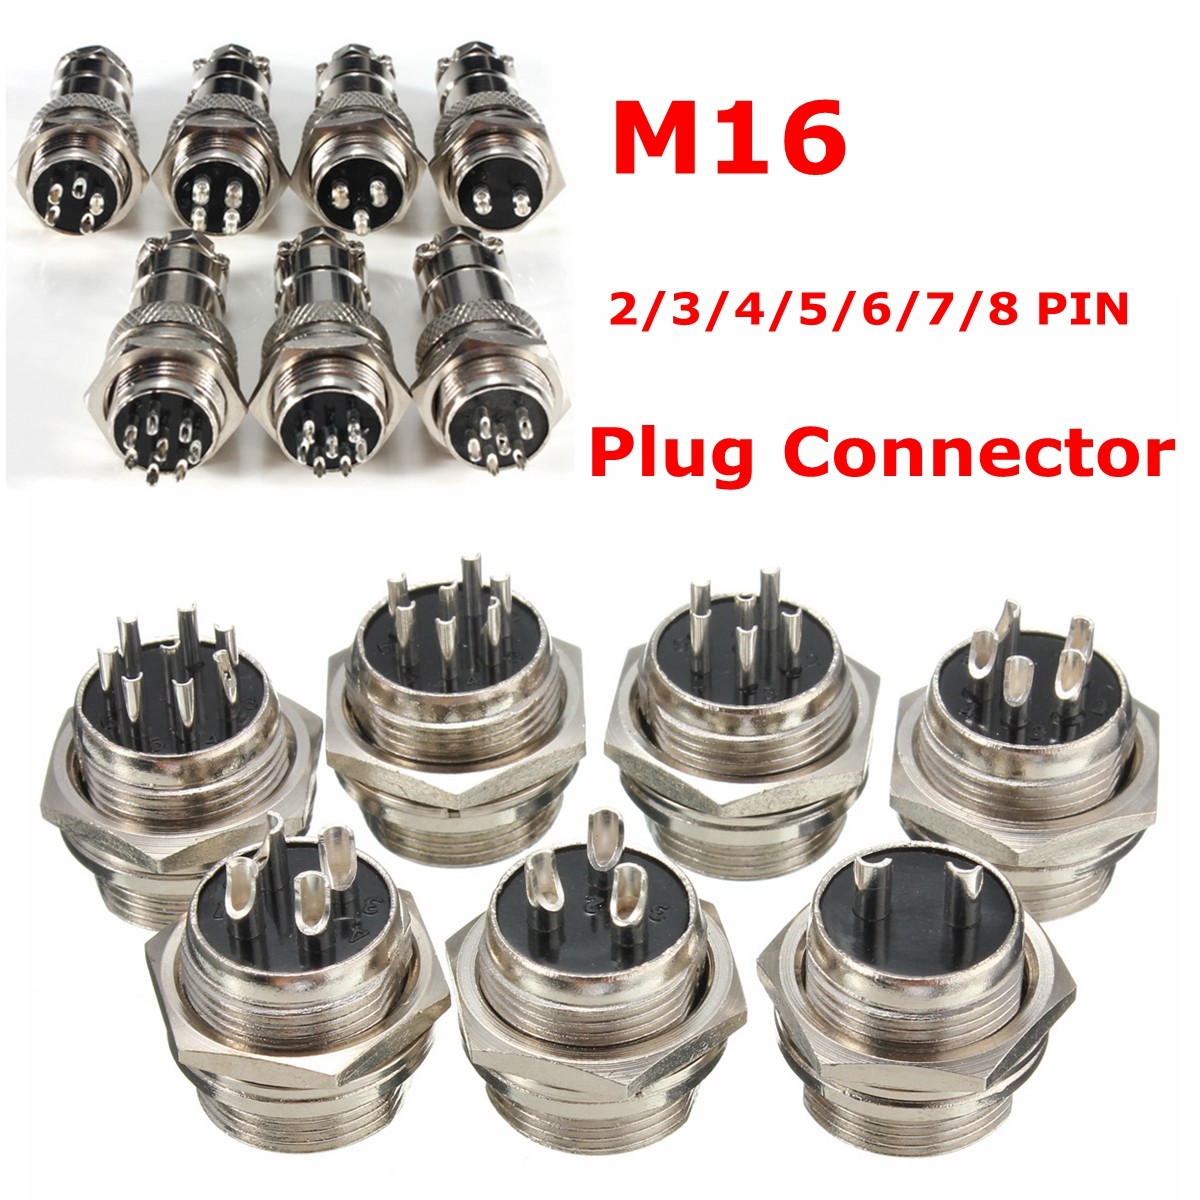 M16-2345678-Pin-Screw-Type-Electrical-Aviation-Plug-Socket-Connector-Aviation-Connector-Plug-1333374-1